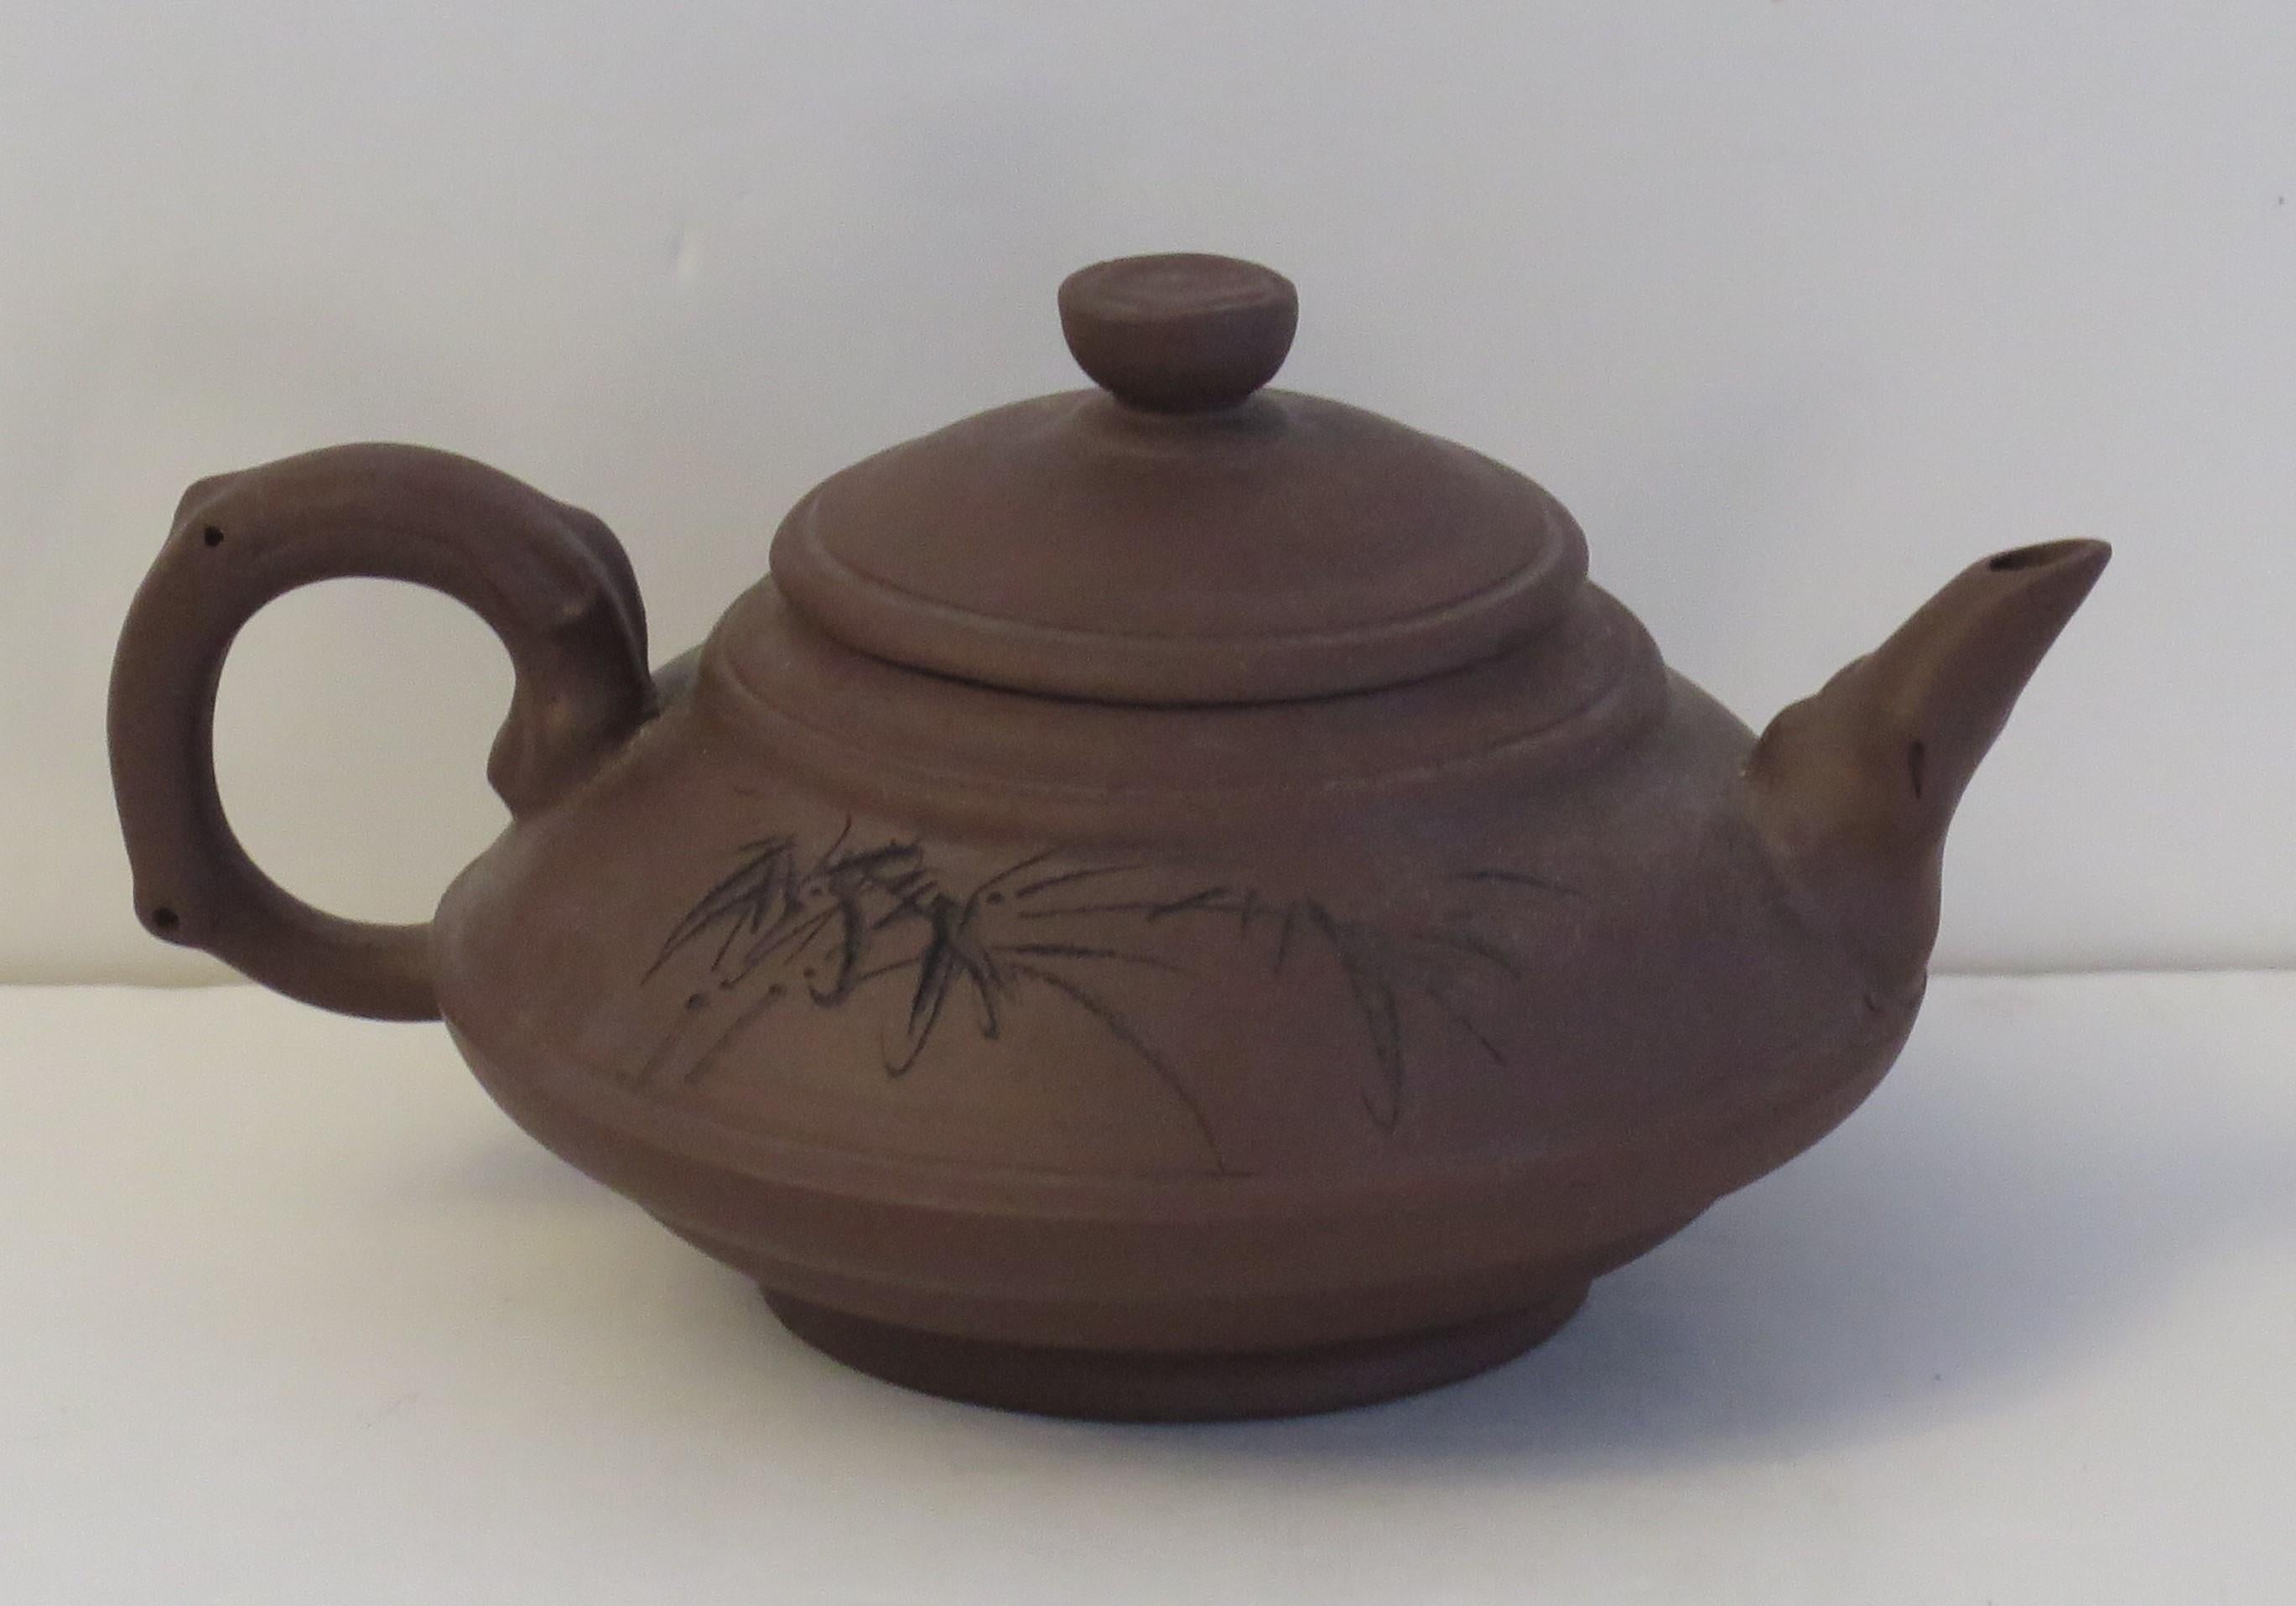 This is a Chinese handcrafted Red Clay Yixing teapot and cover, which we date to the 20th century, circa 1950.

The Teapot and lid are handcrafted in an interesting shape and made of Red Clay stoneware. The teapot is inscribed on the upper body with